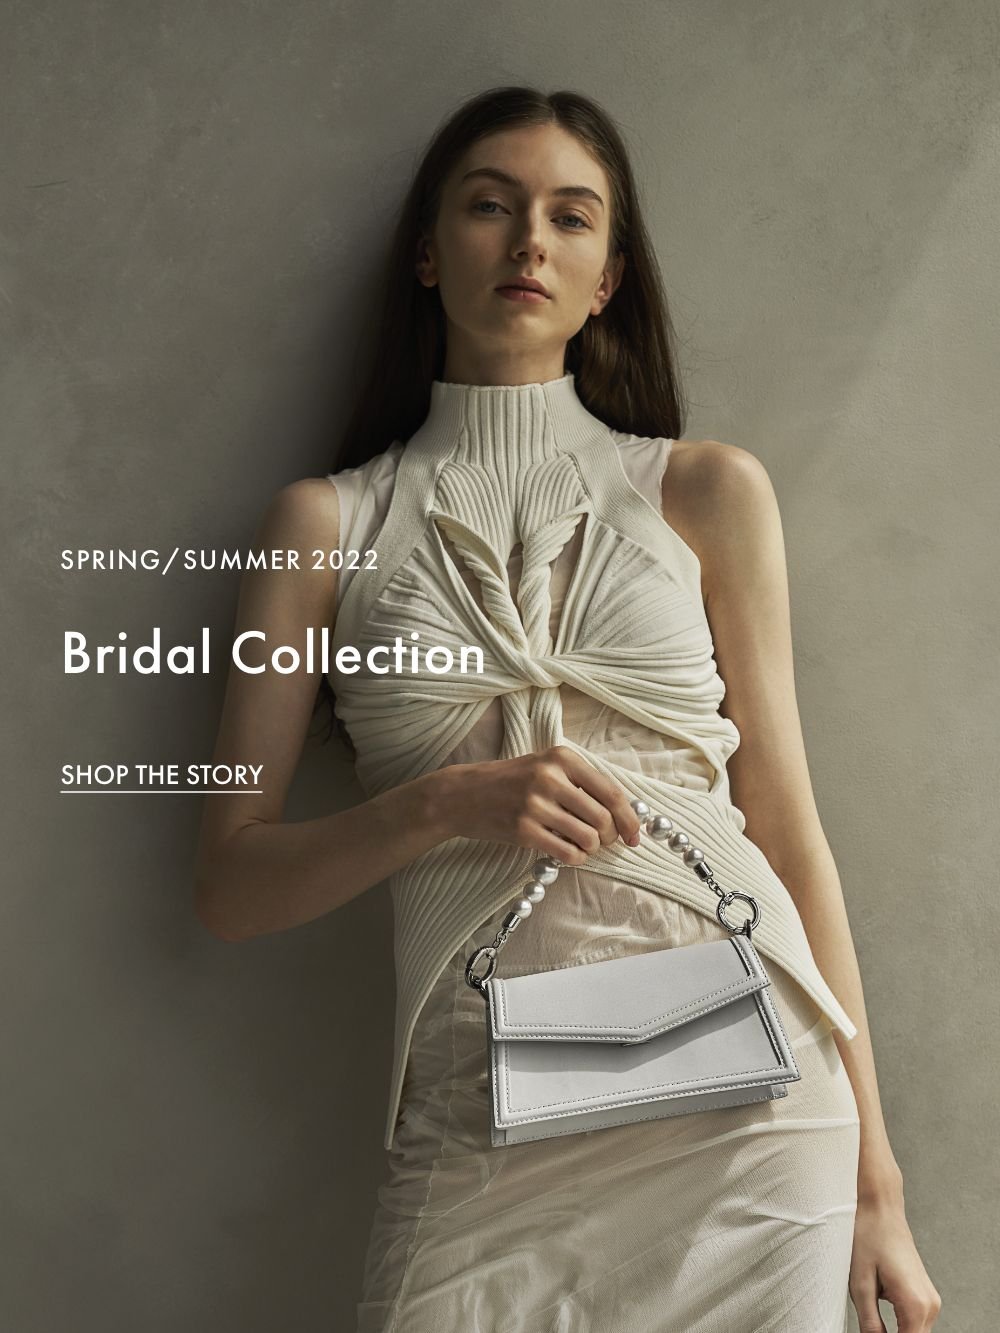 Say I Do With CHARLES & KEITH's New Bridal Collection